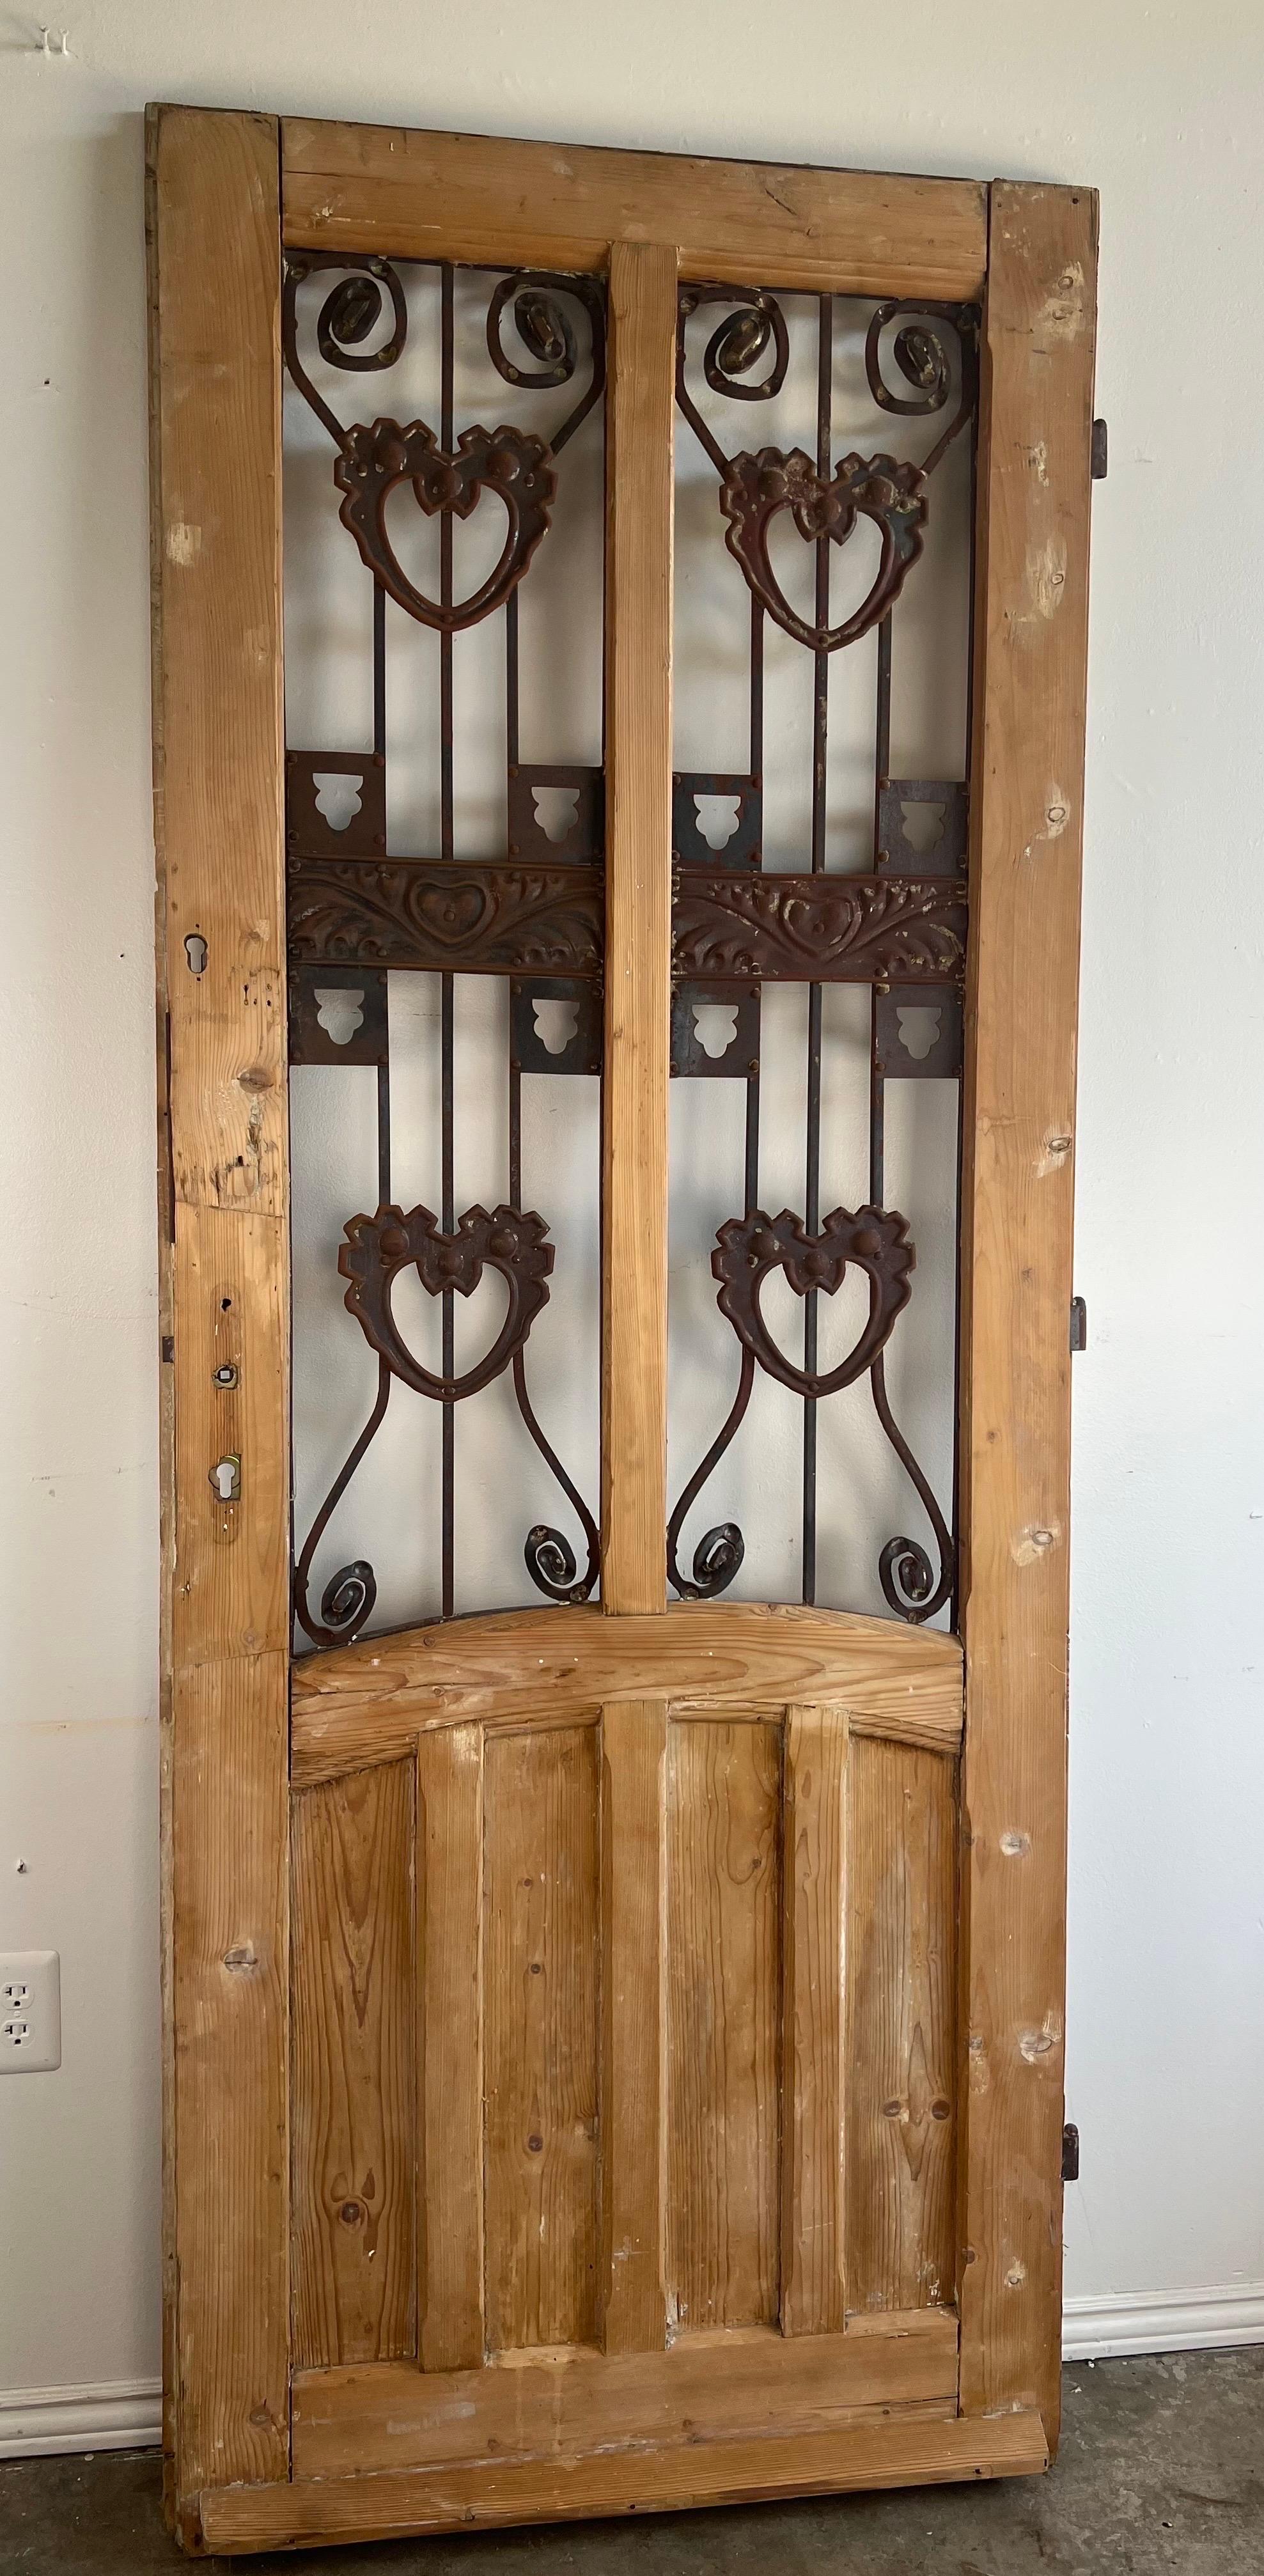 Early 20th century  pine & wrought iron door.  The door had hand forged iron depicting hearts, acanthus leaves and so much more.